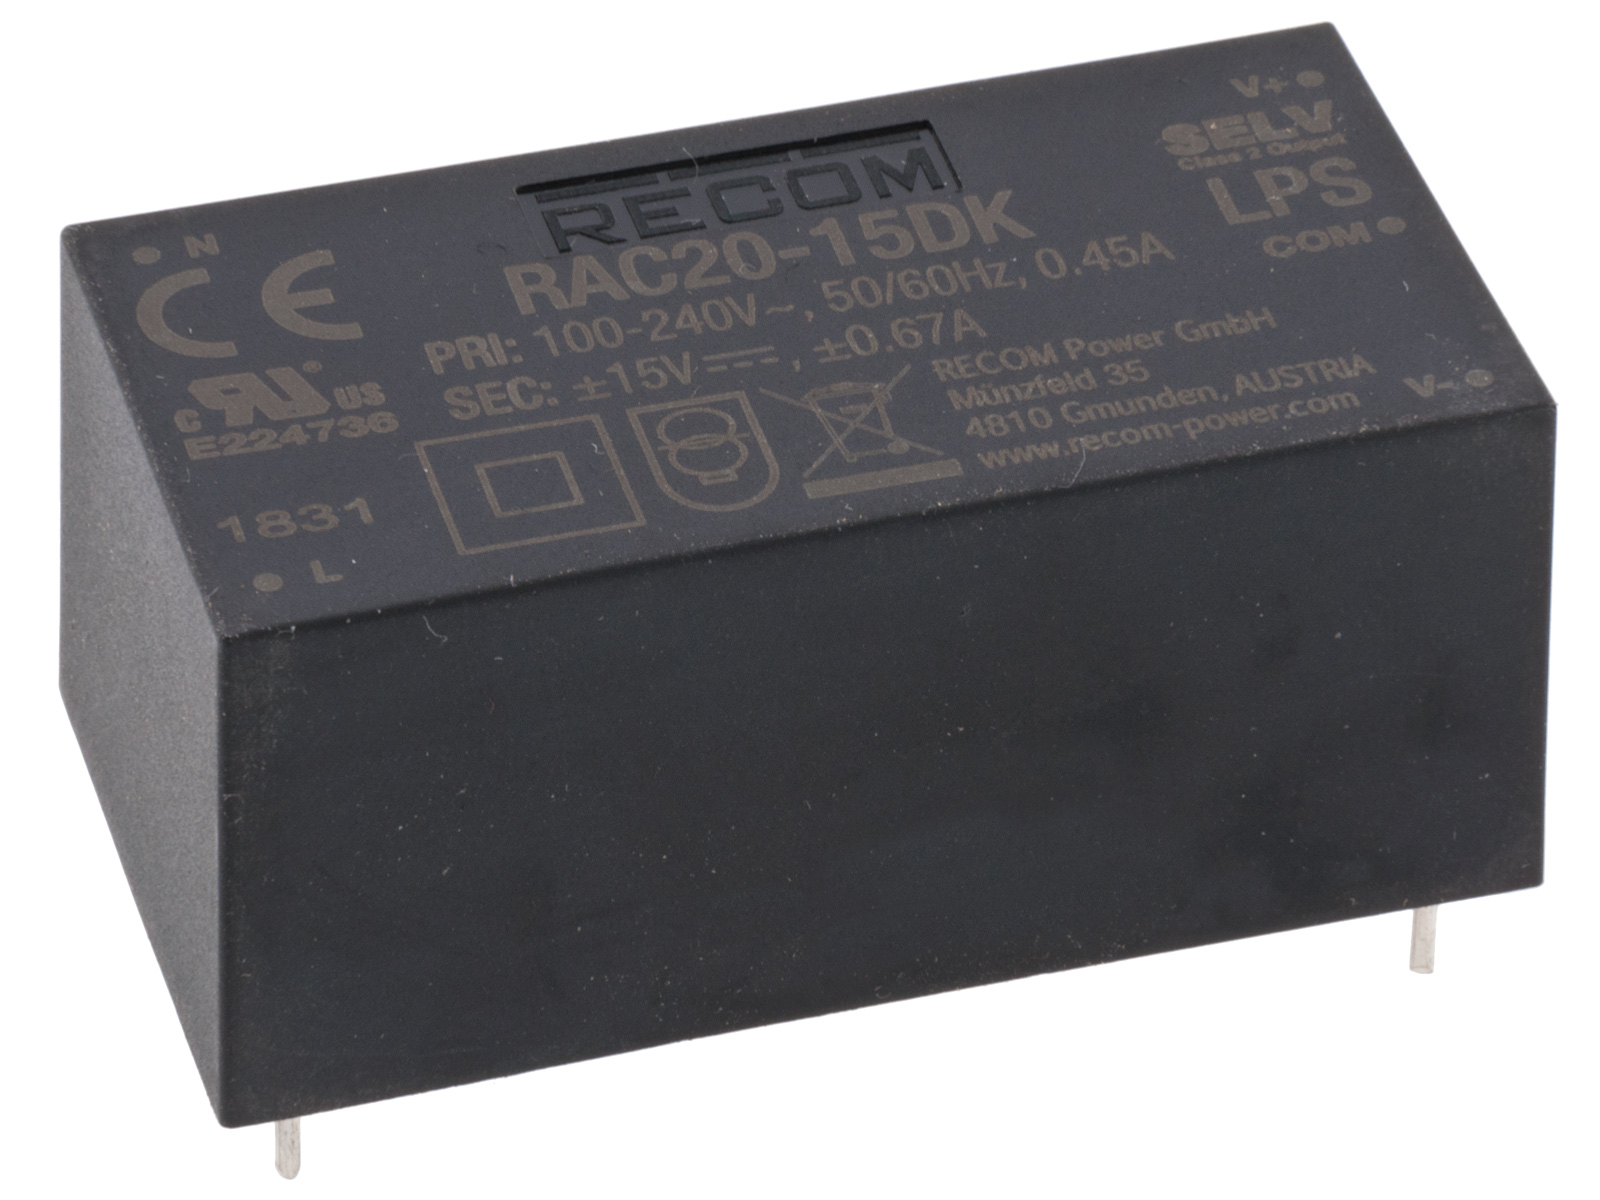 Switched power supply 20W ±12V @ electrokit